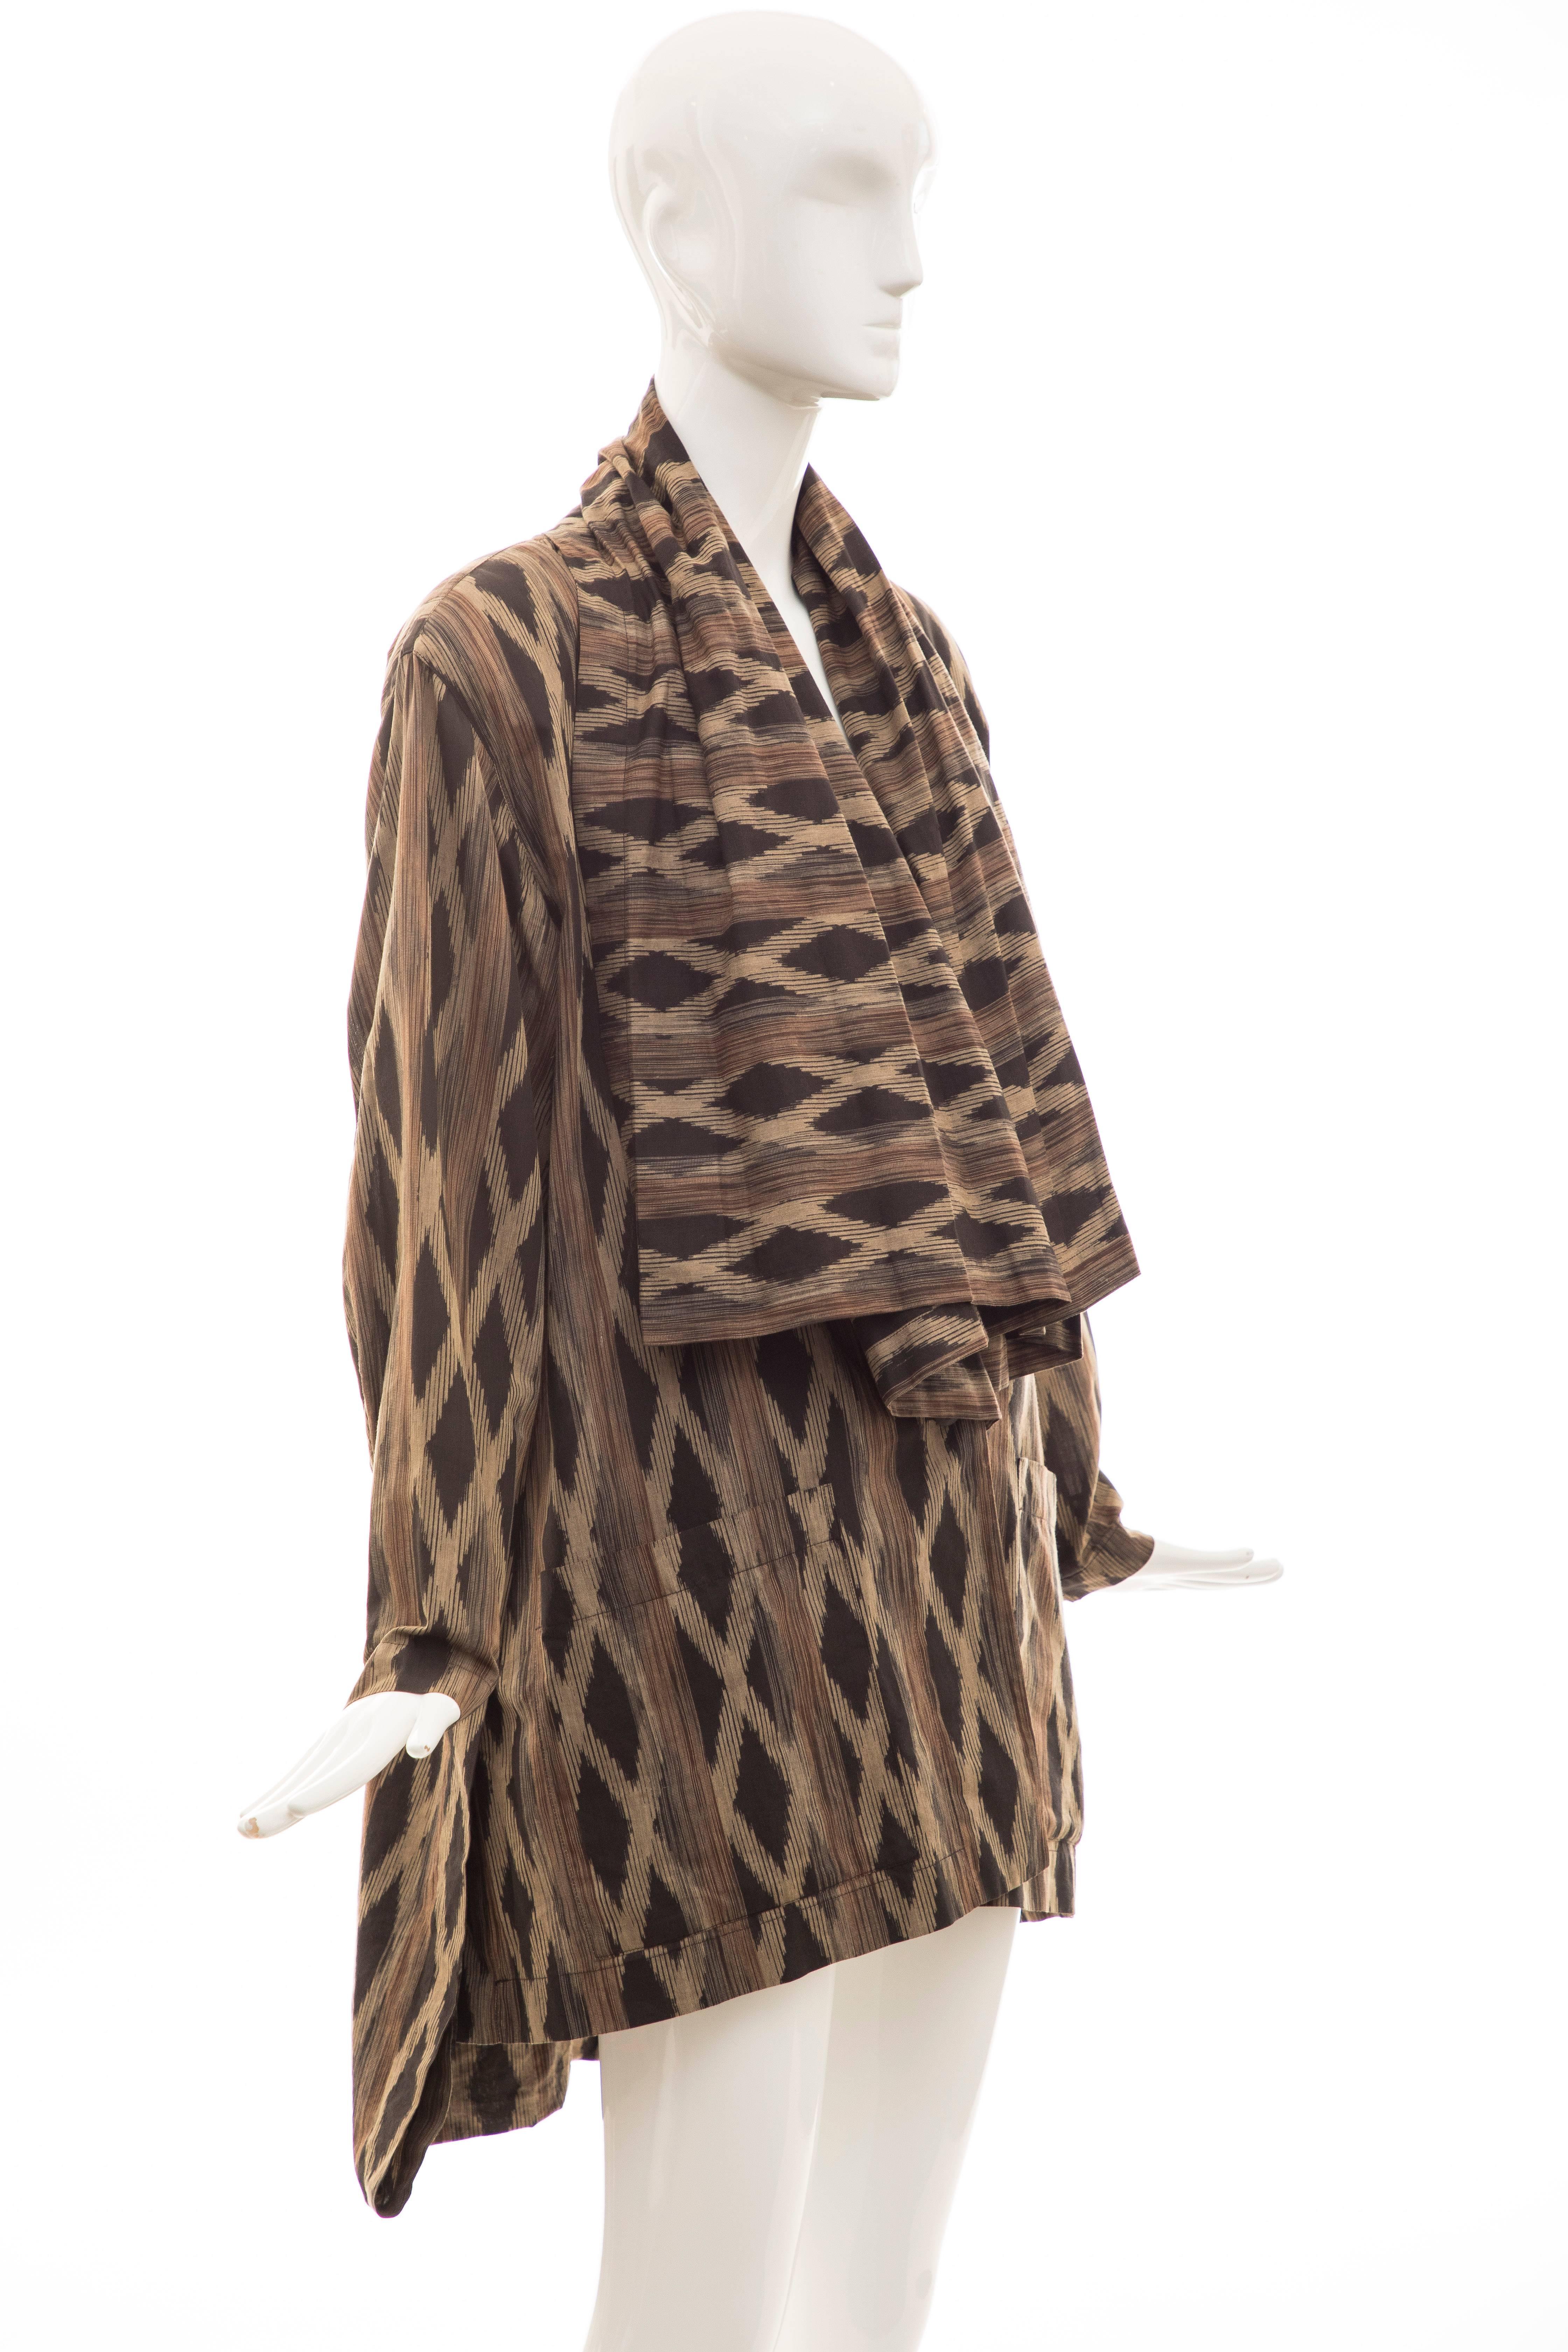 Issey Miyake Cotton Silk Lattice Weave Jacket Duster Cardigan, Fall 1986 In Excellent Condition For Sale In Cincinnati, OH